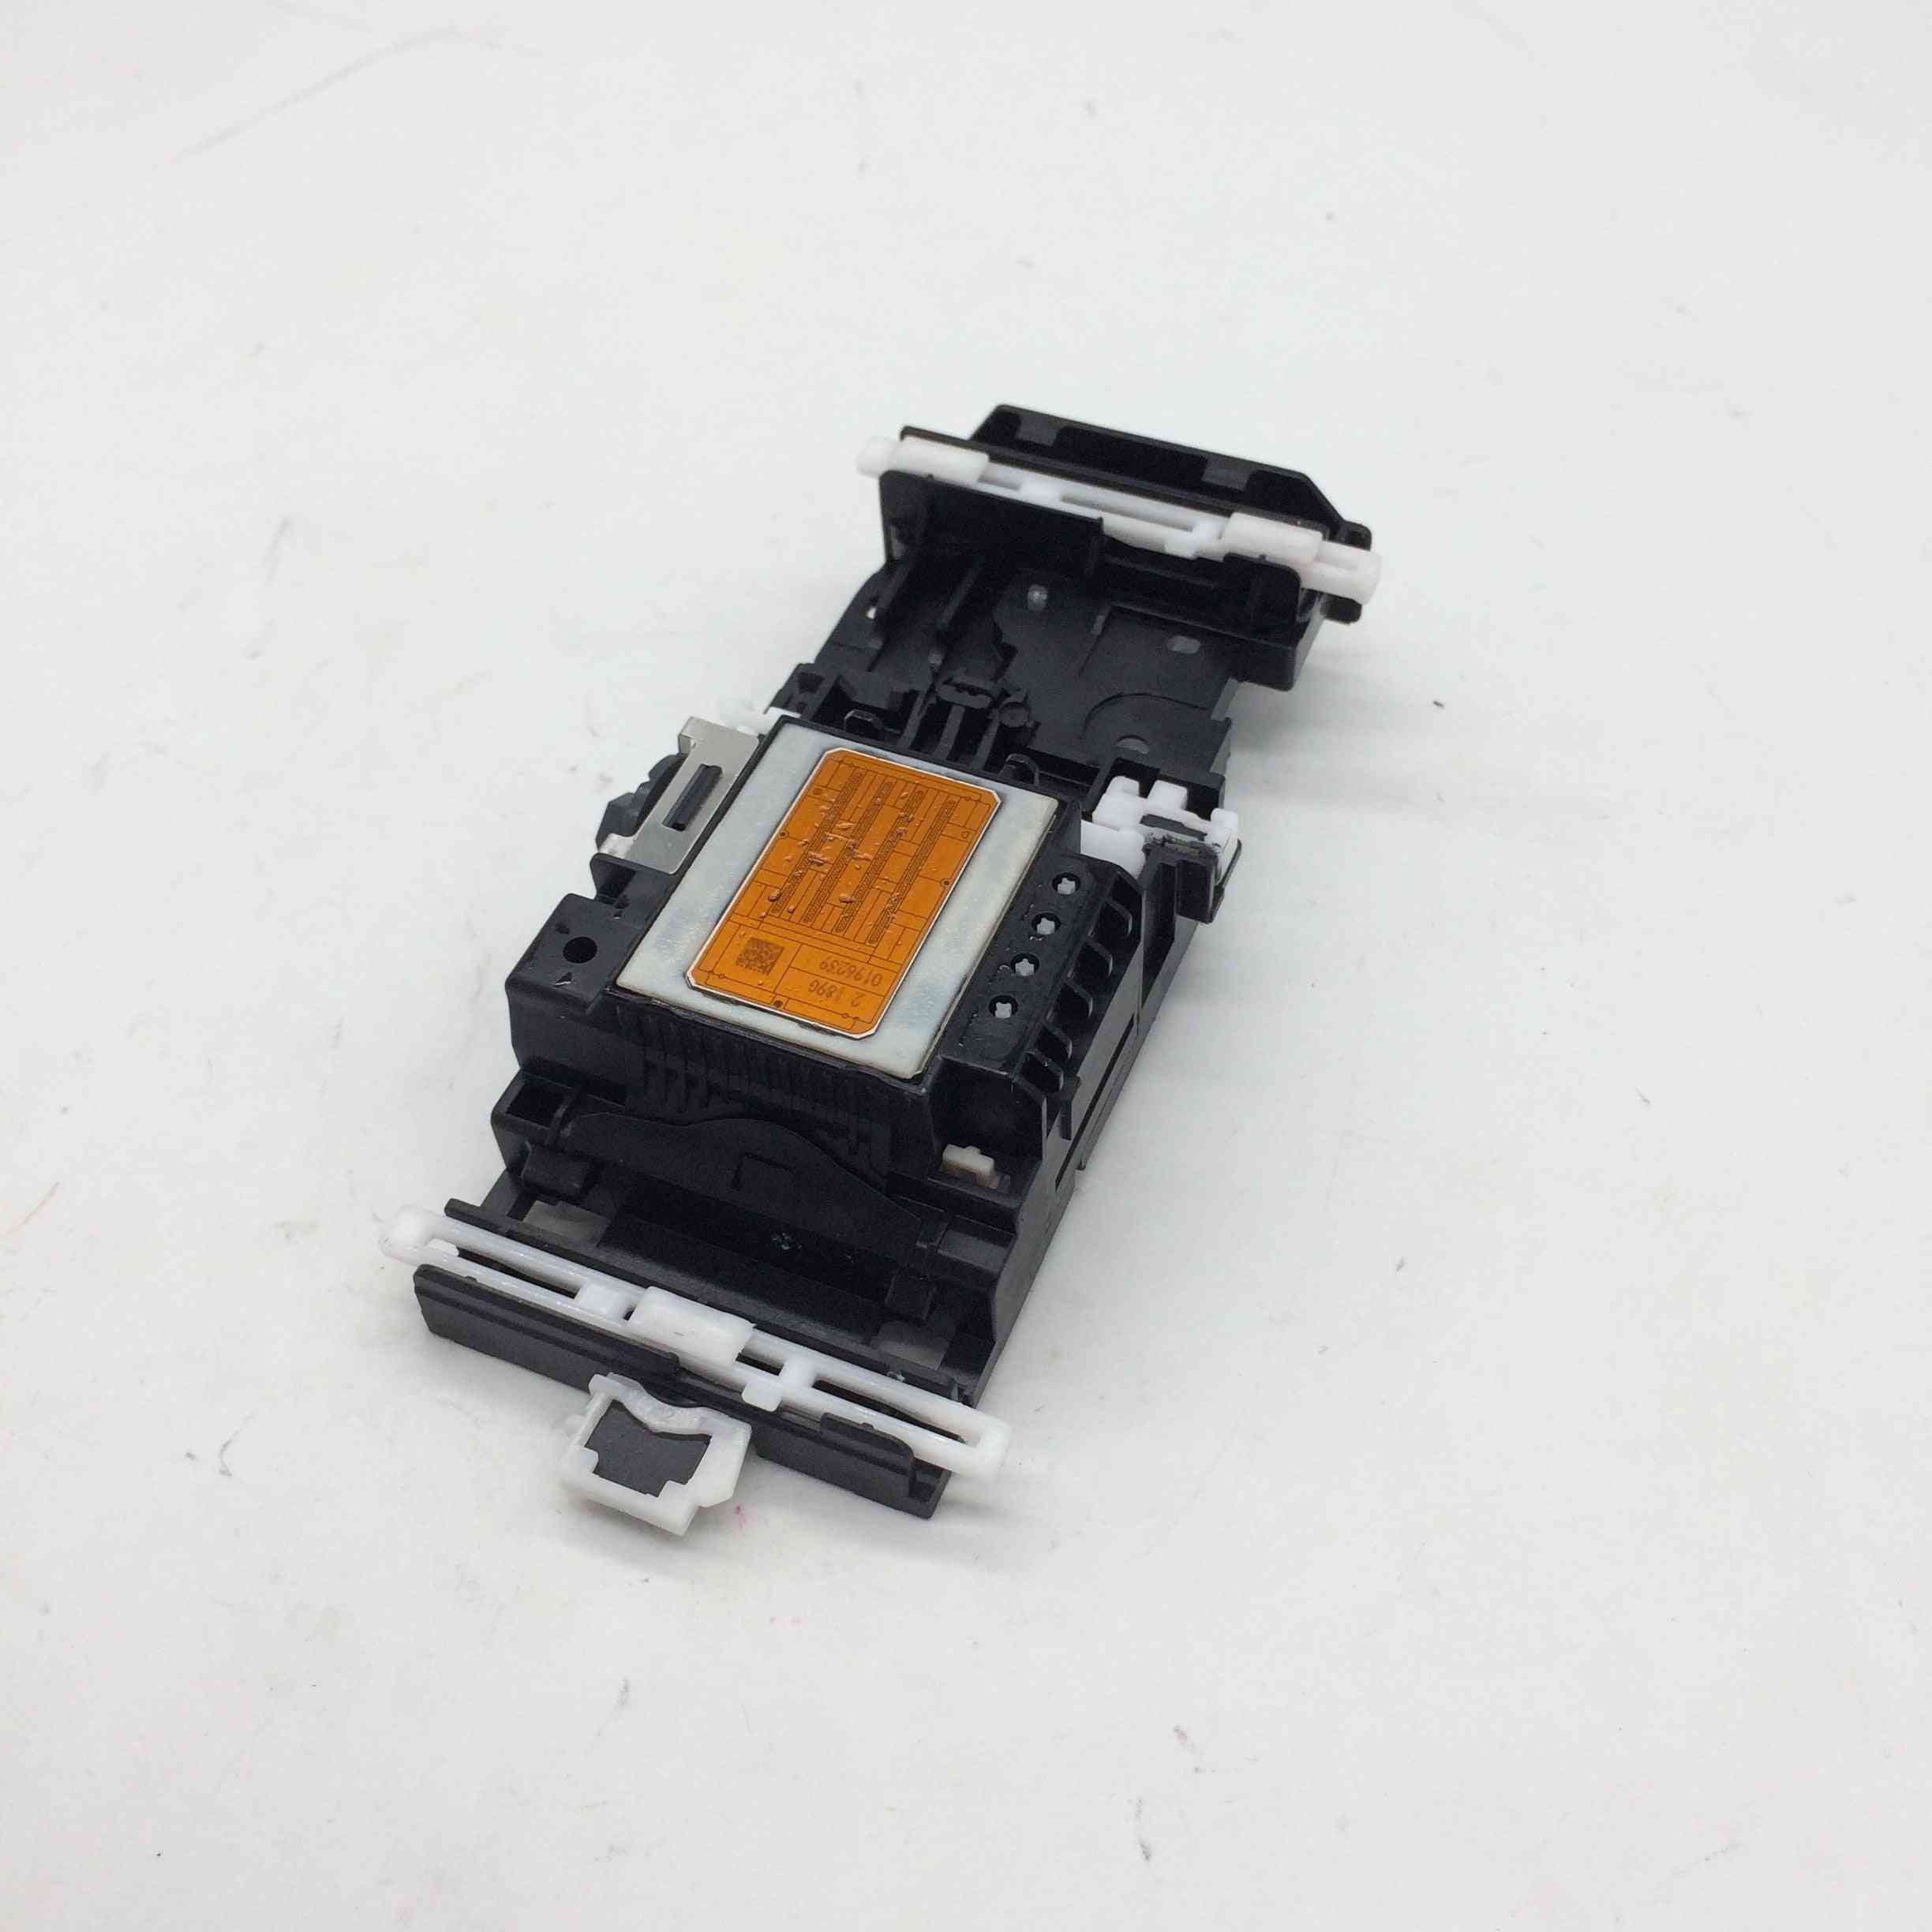 Original Print Head For Brother 990a4 Inkjet